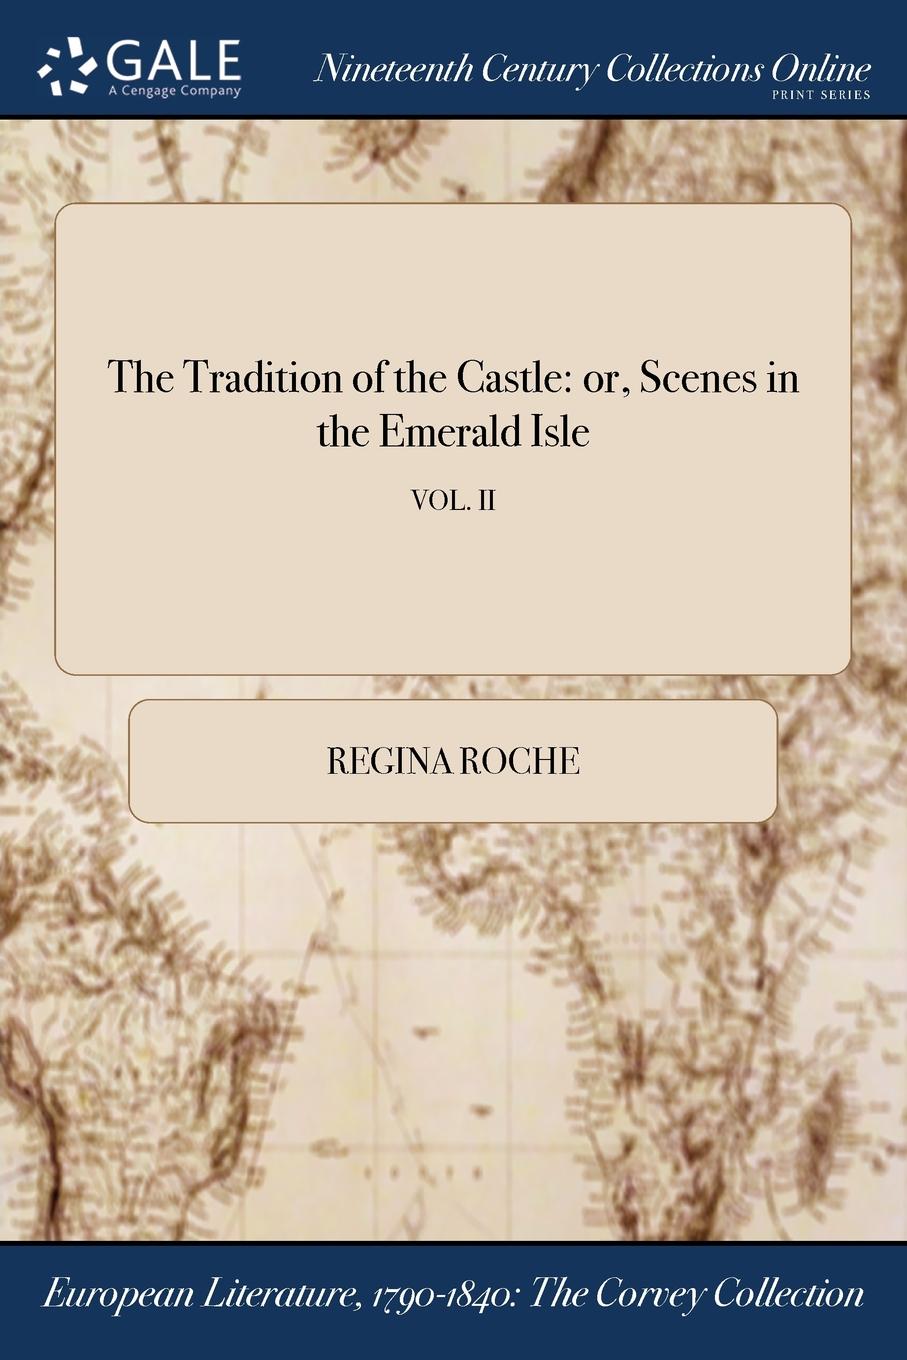 The Tradition of the Castle. or, Scenes in the Emerald Isle; VOL. II